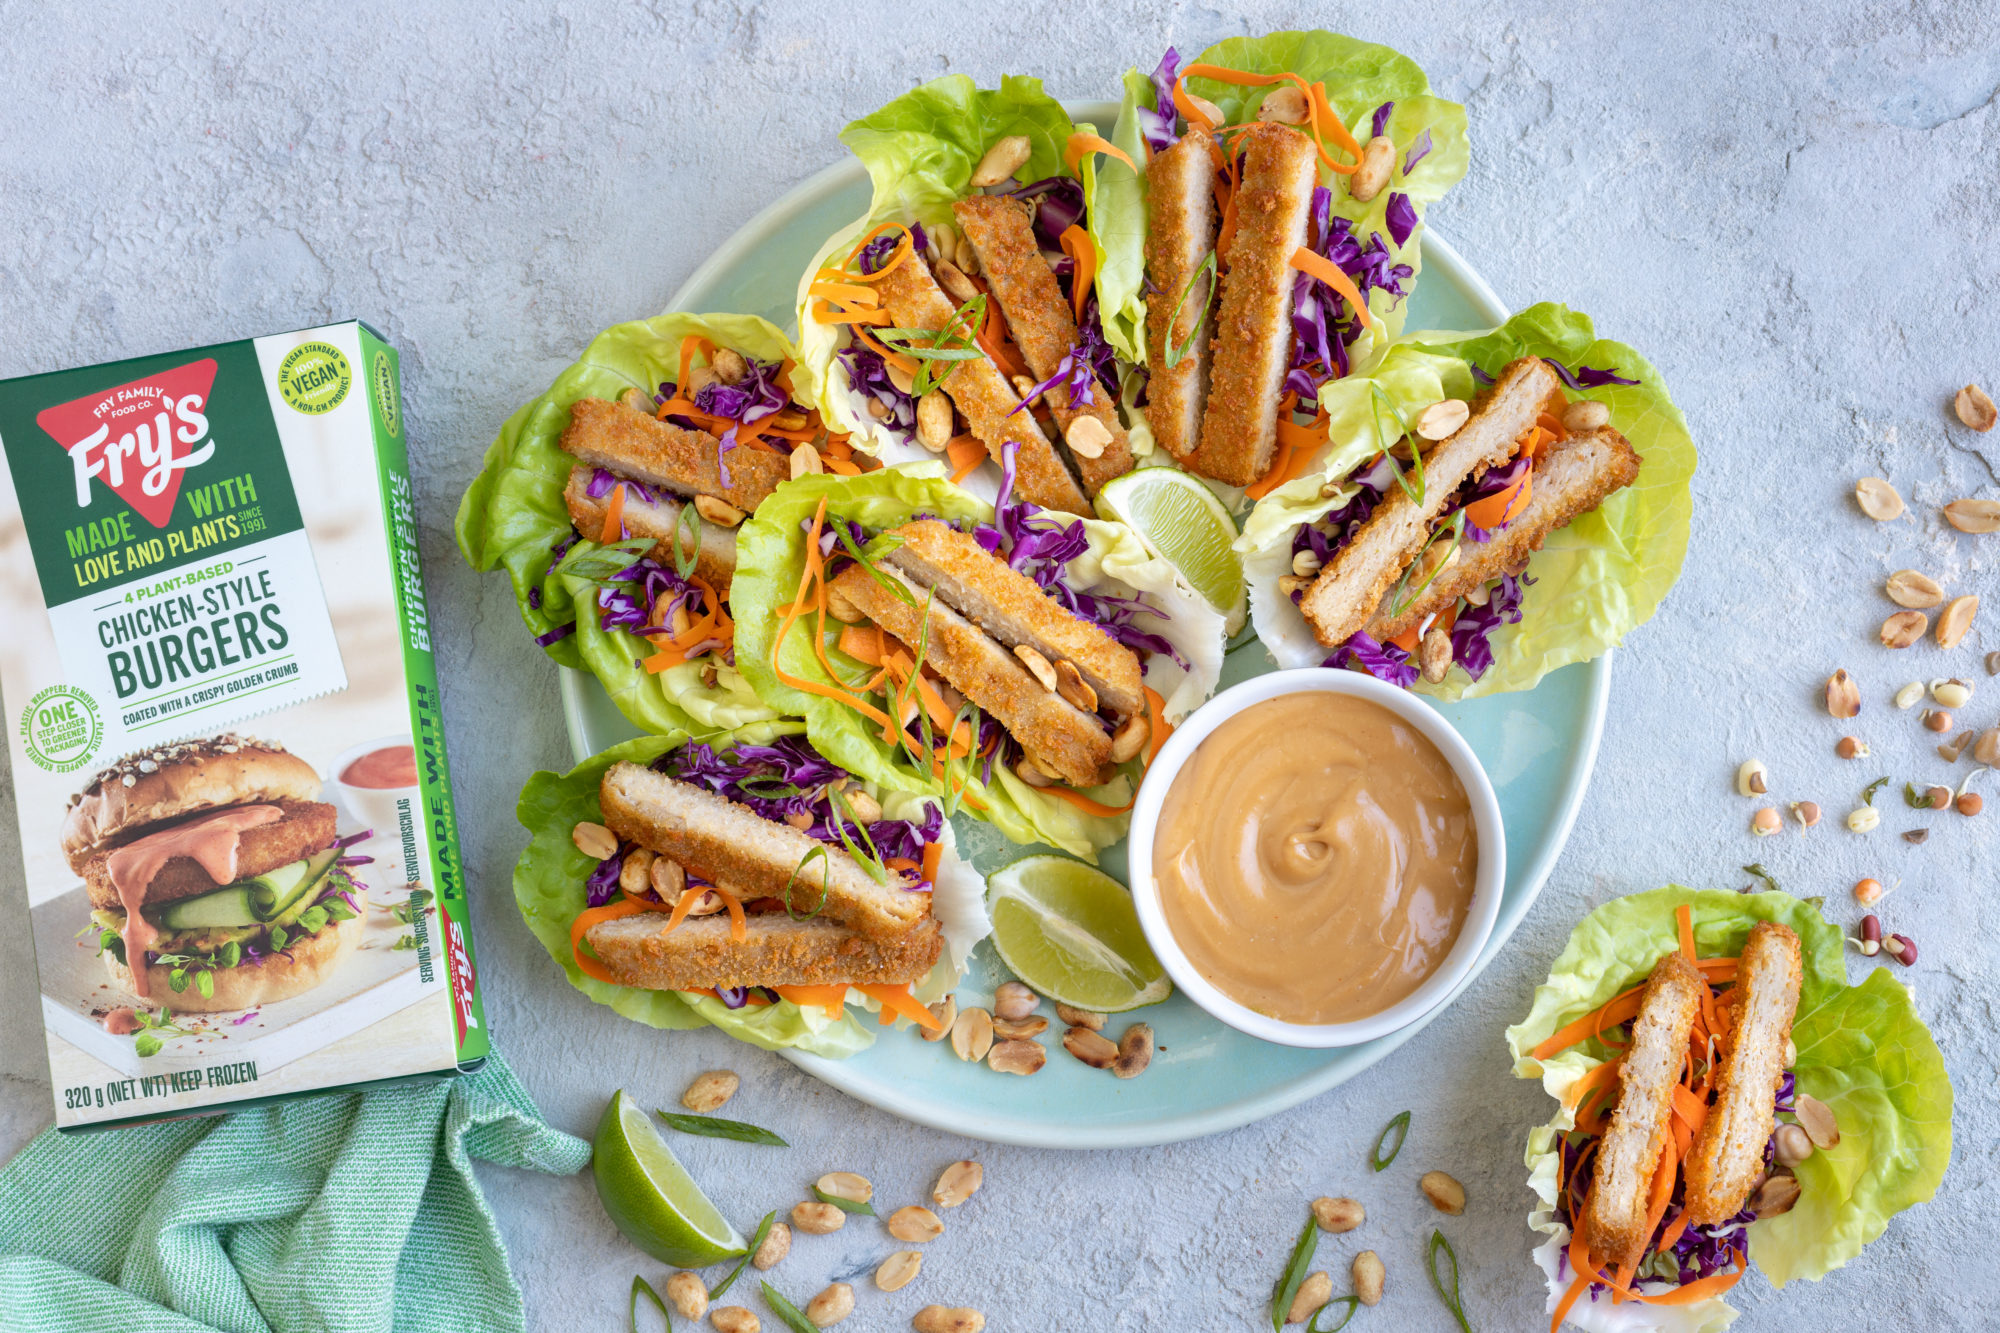 Fry's Chicken-Style burgers in lettuce cups